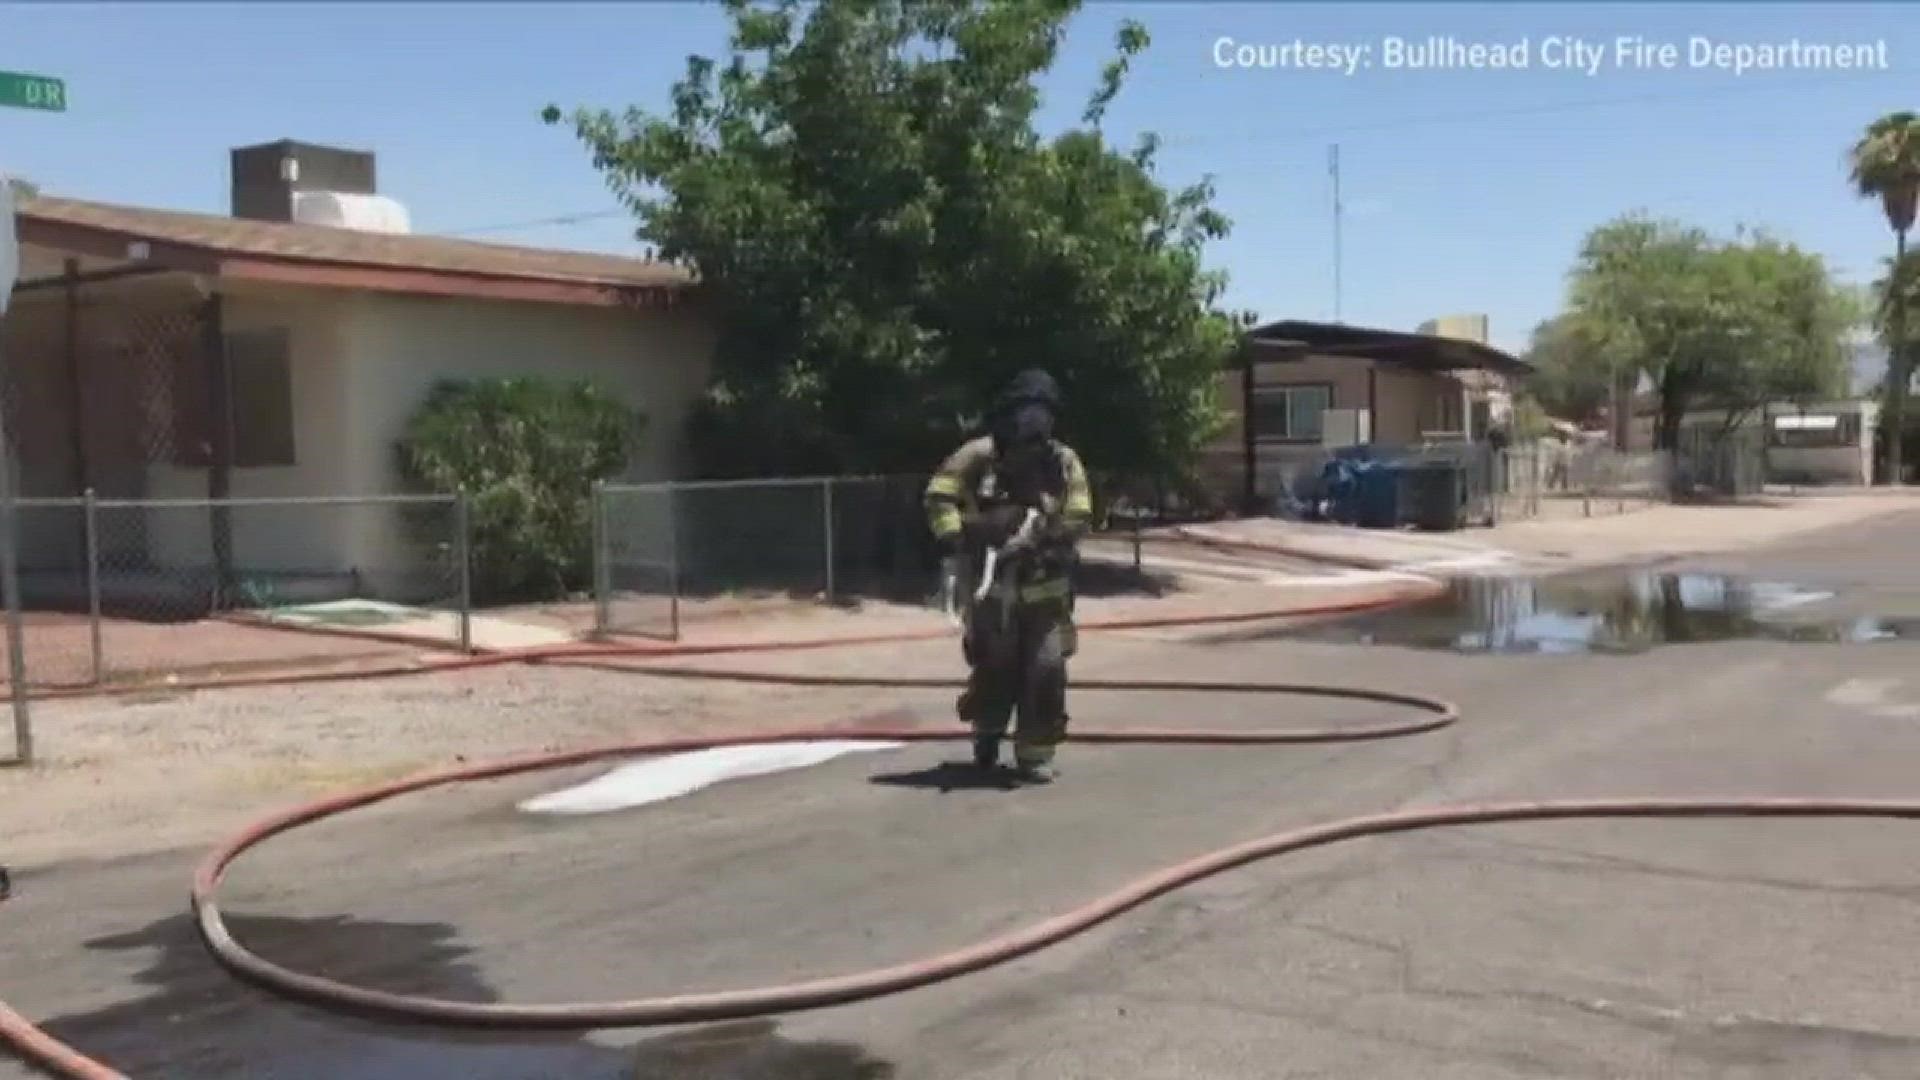 They used a Fido bag to rescue the dog from a burning home in Bullhead City.